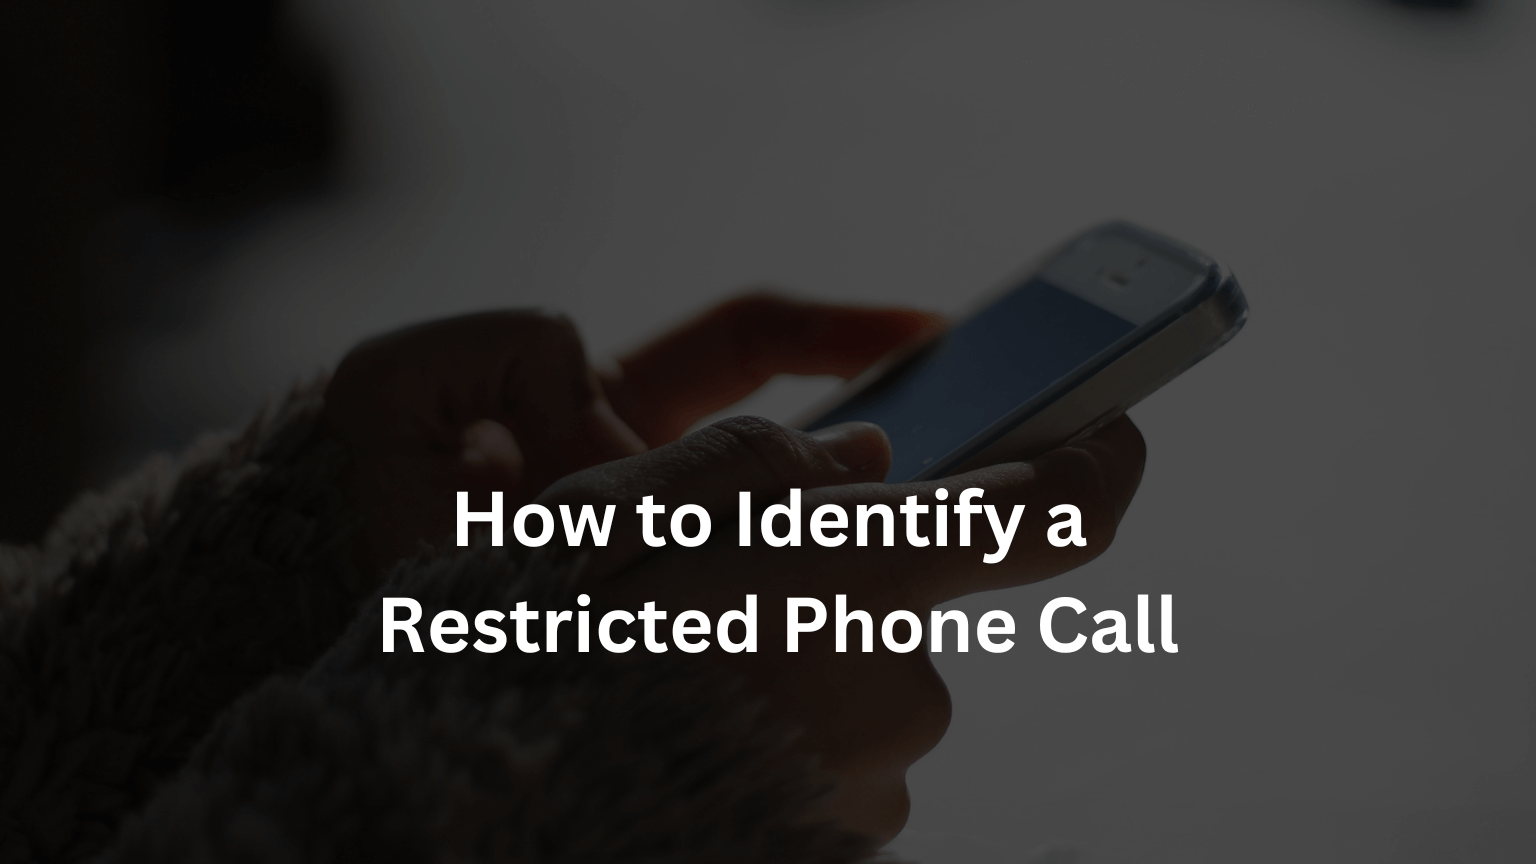 How to Identify a Restricted Phone Call